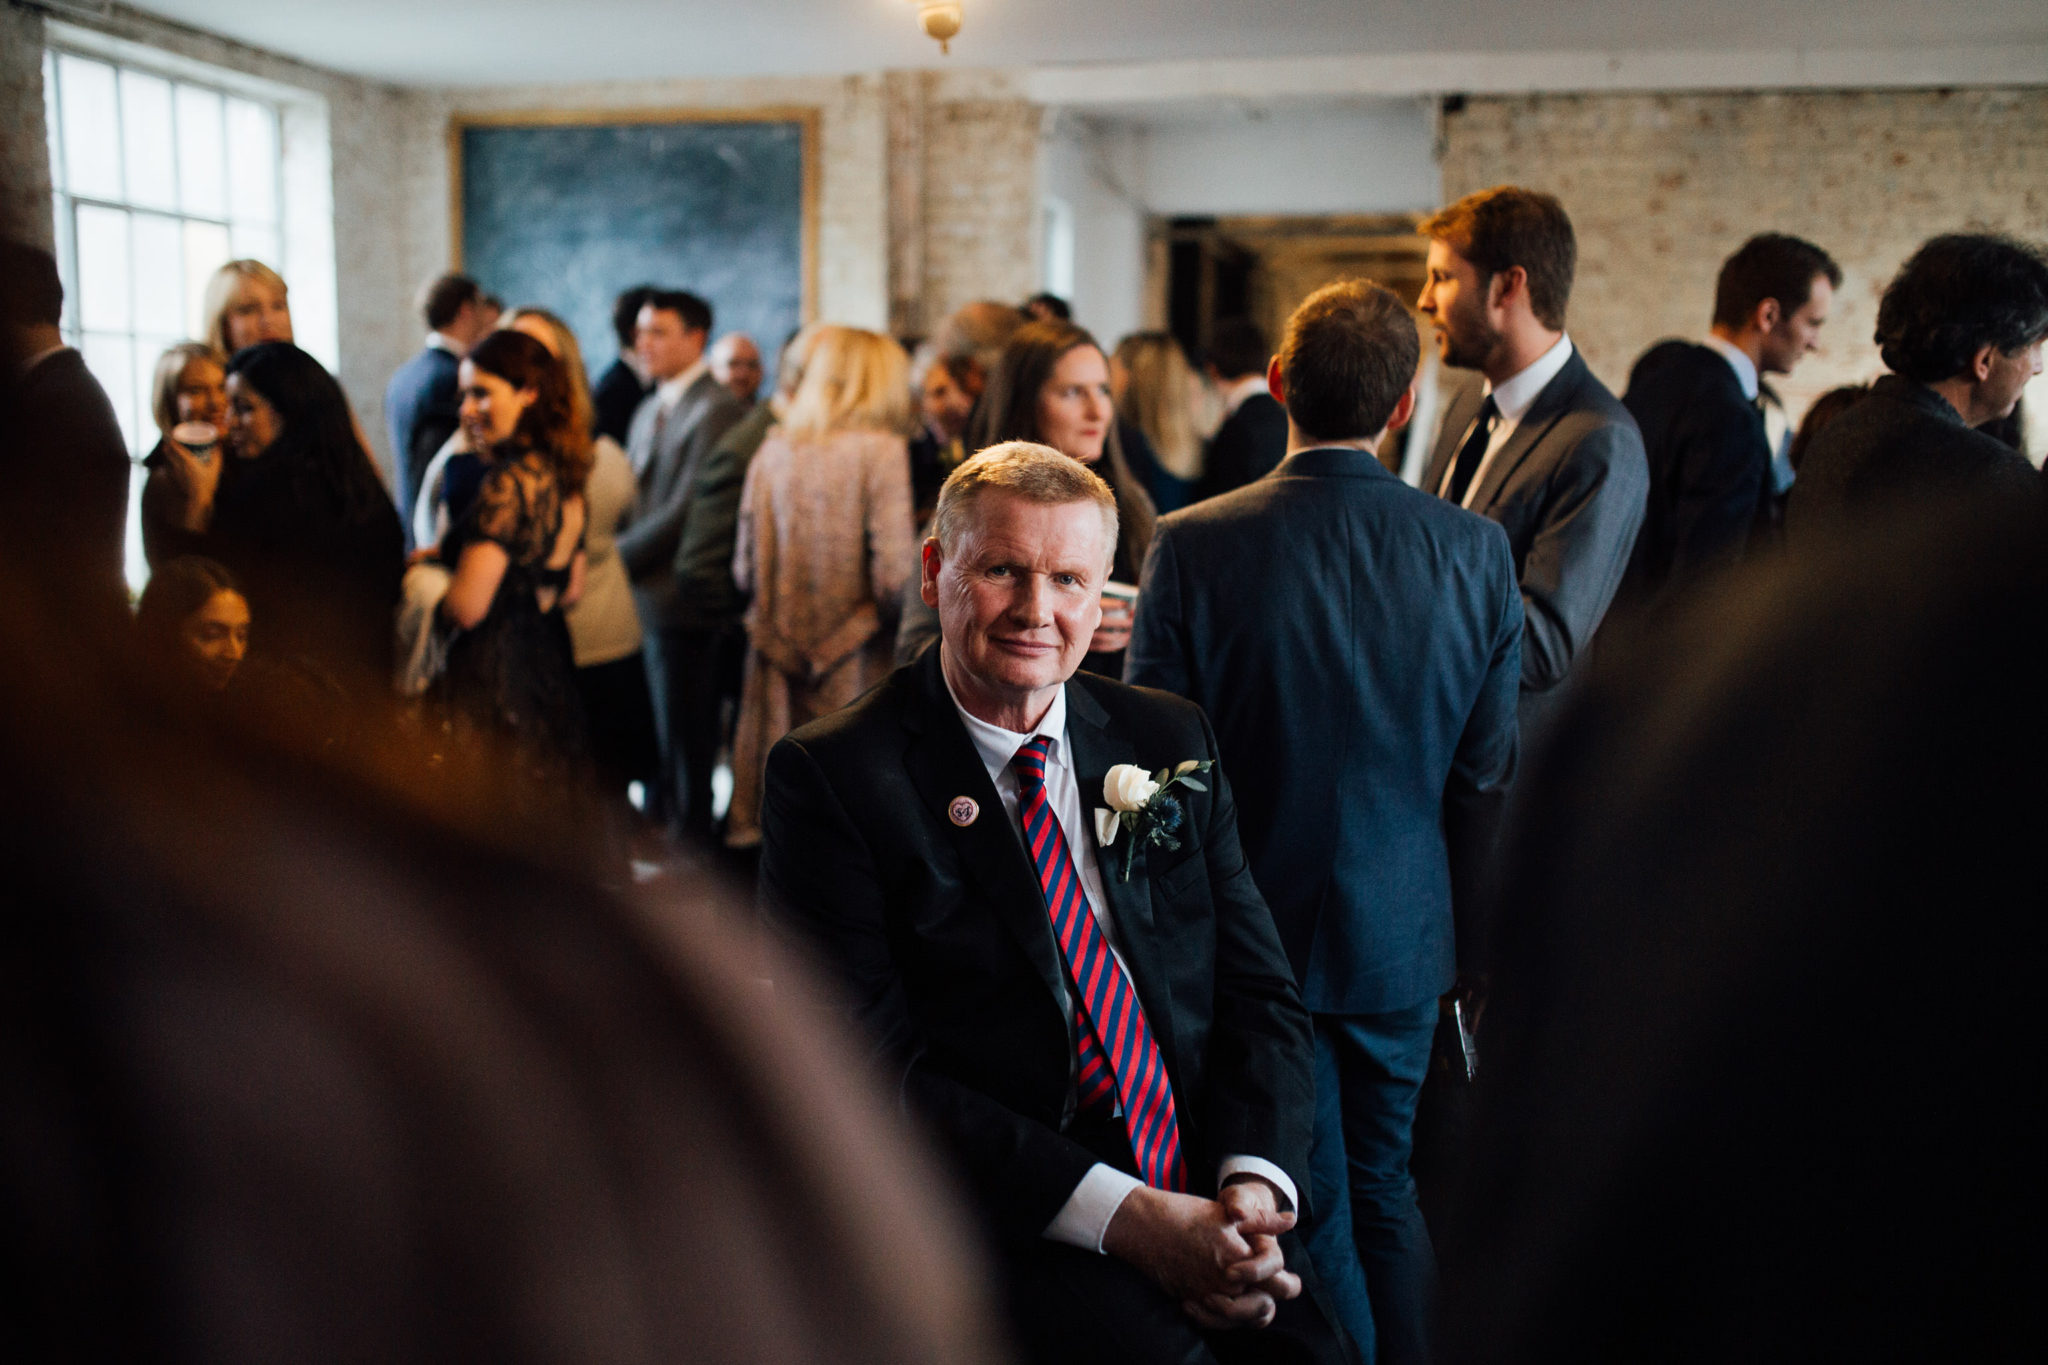 CANDIDS AT WAREHOUSE WEDDING AT ONE FRIENDLY PLACE LONDON WEDDING PHOTOGRAPHY